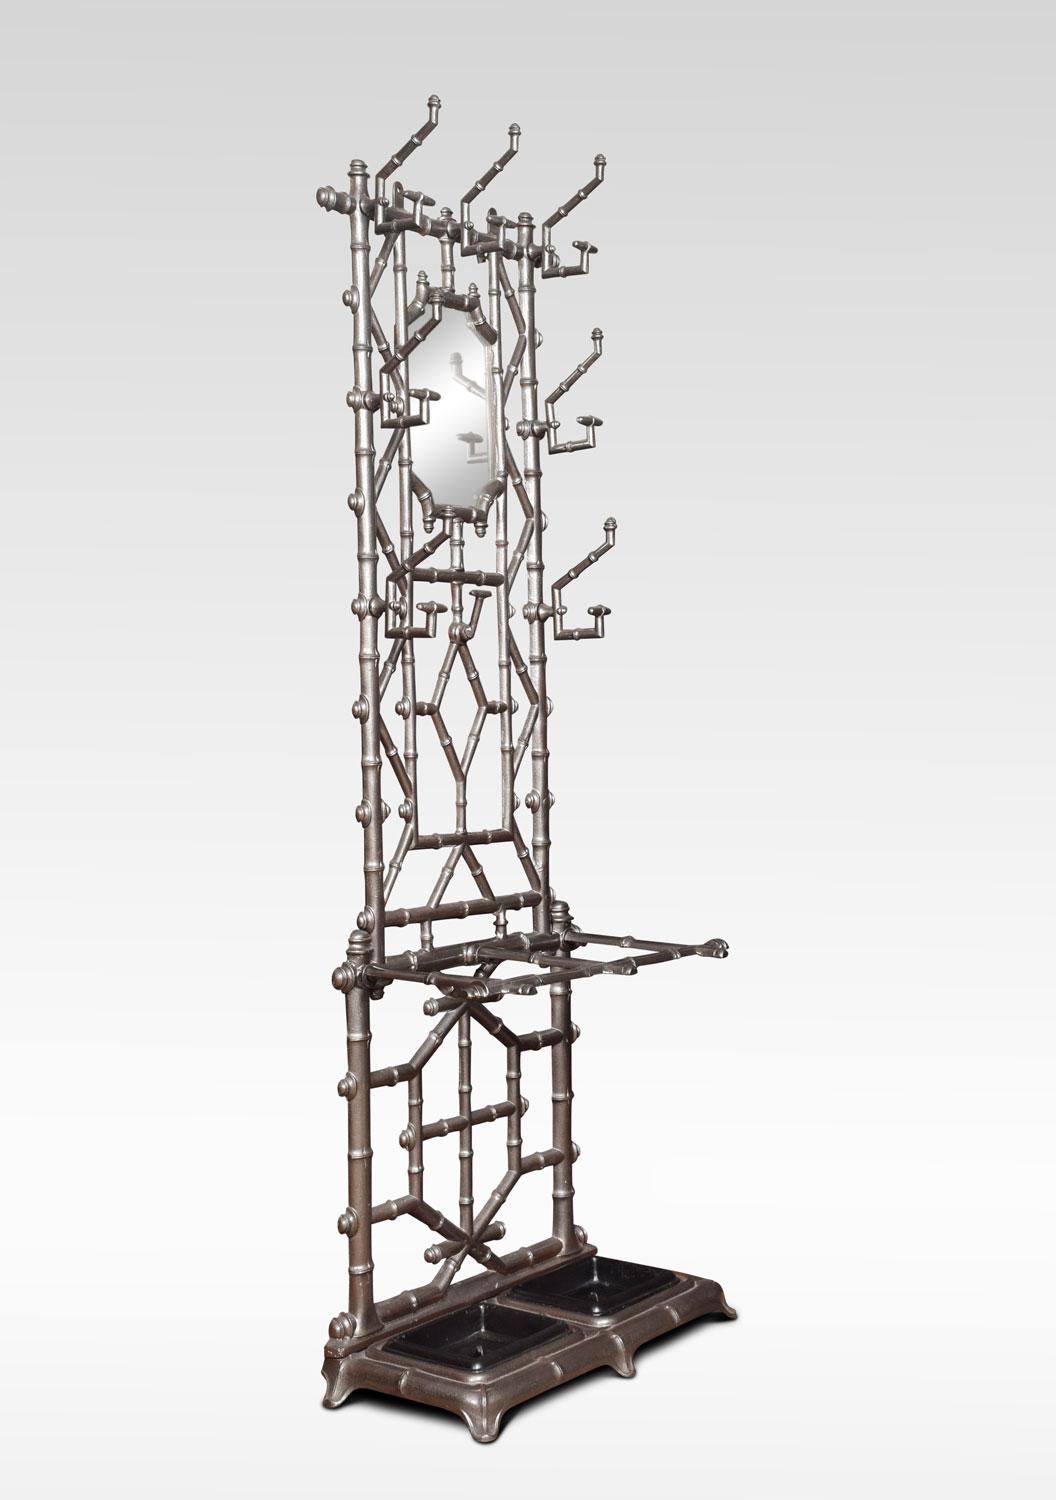 Late Victorian, cast iron hall stand having eight coat and hat hooks surrounding the mirror to centre. The base fitted with umbrella Stand having removable drip trays.
Dimensions
Height 72 inches
Width 25.5 inches
Depth 13.5 inches.